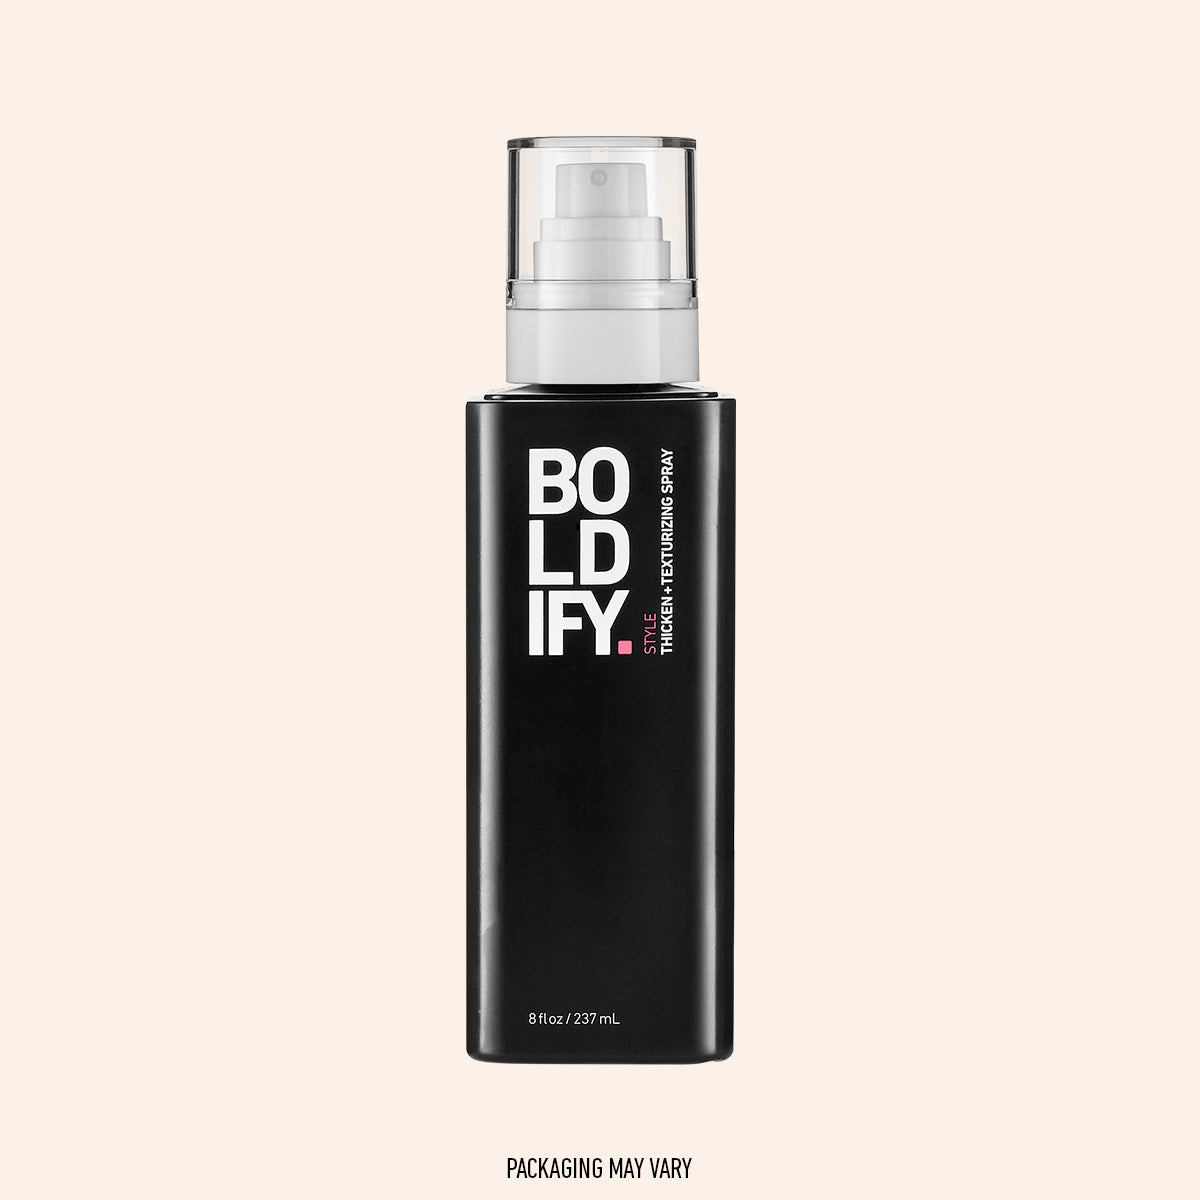 BOLDIFY Dry Texture Spray for Hair Volume - Incredible Root Lifter Hair  Product